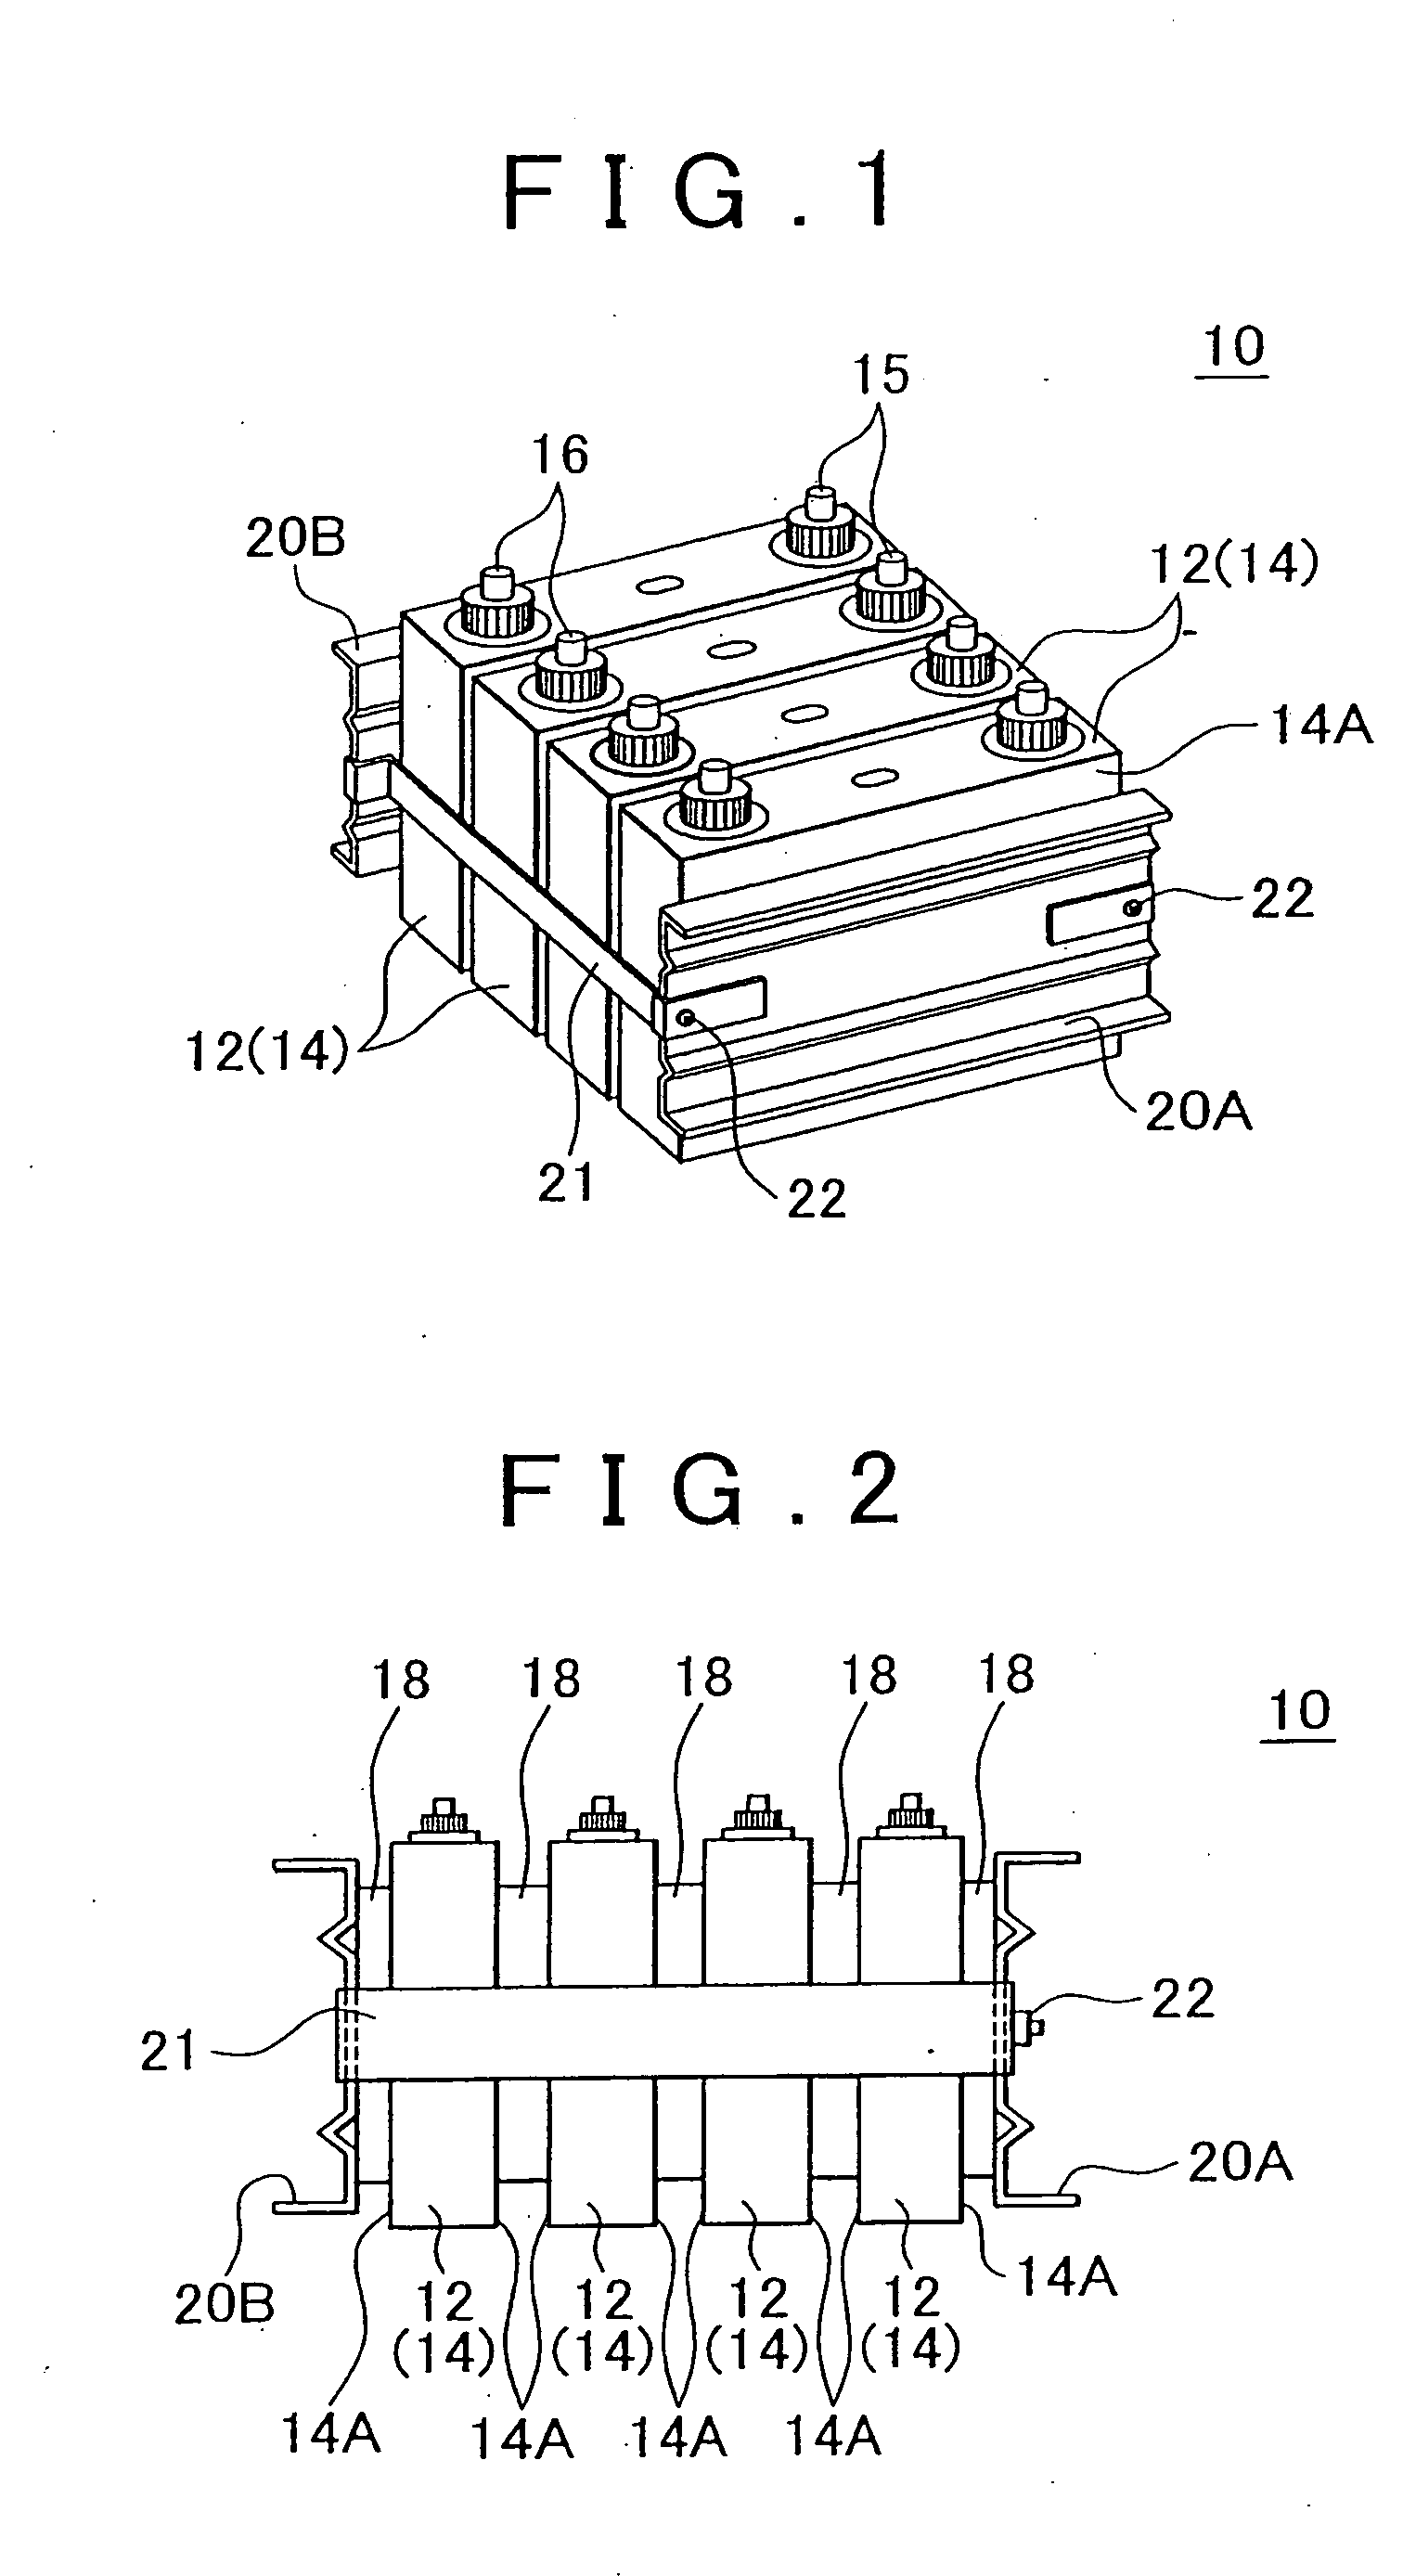 Battery module, method of fabricating the same, and vehicle having battery module